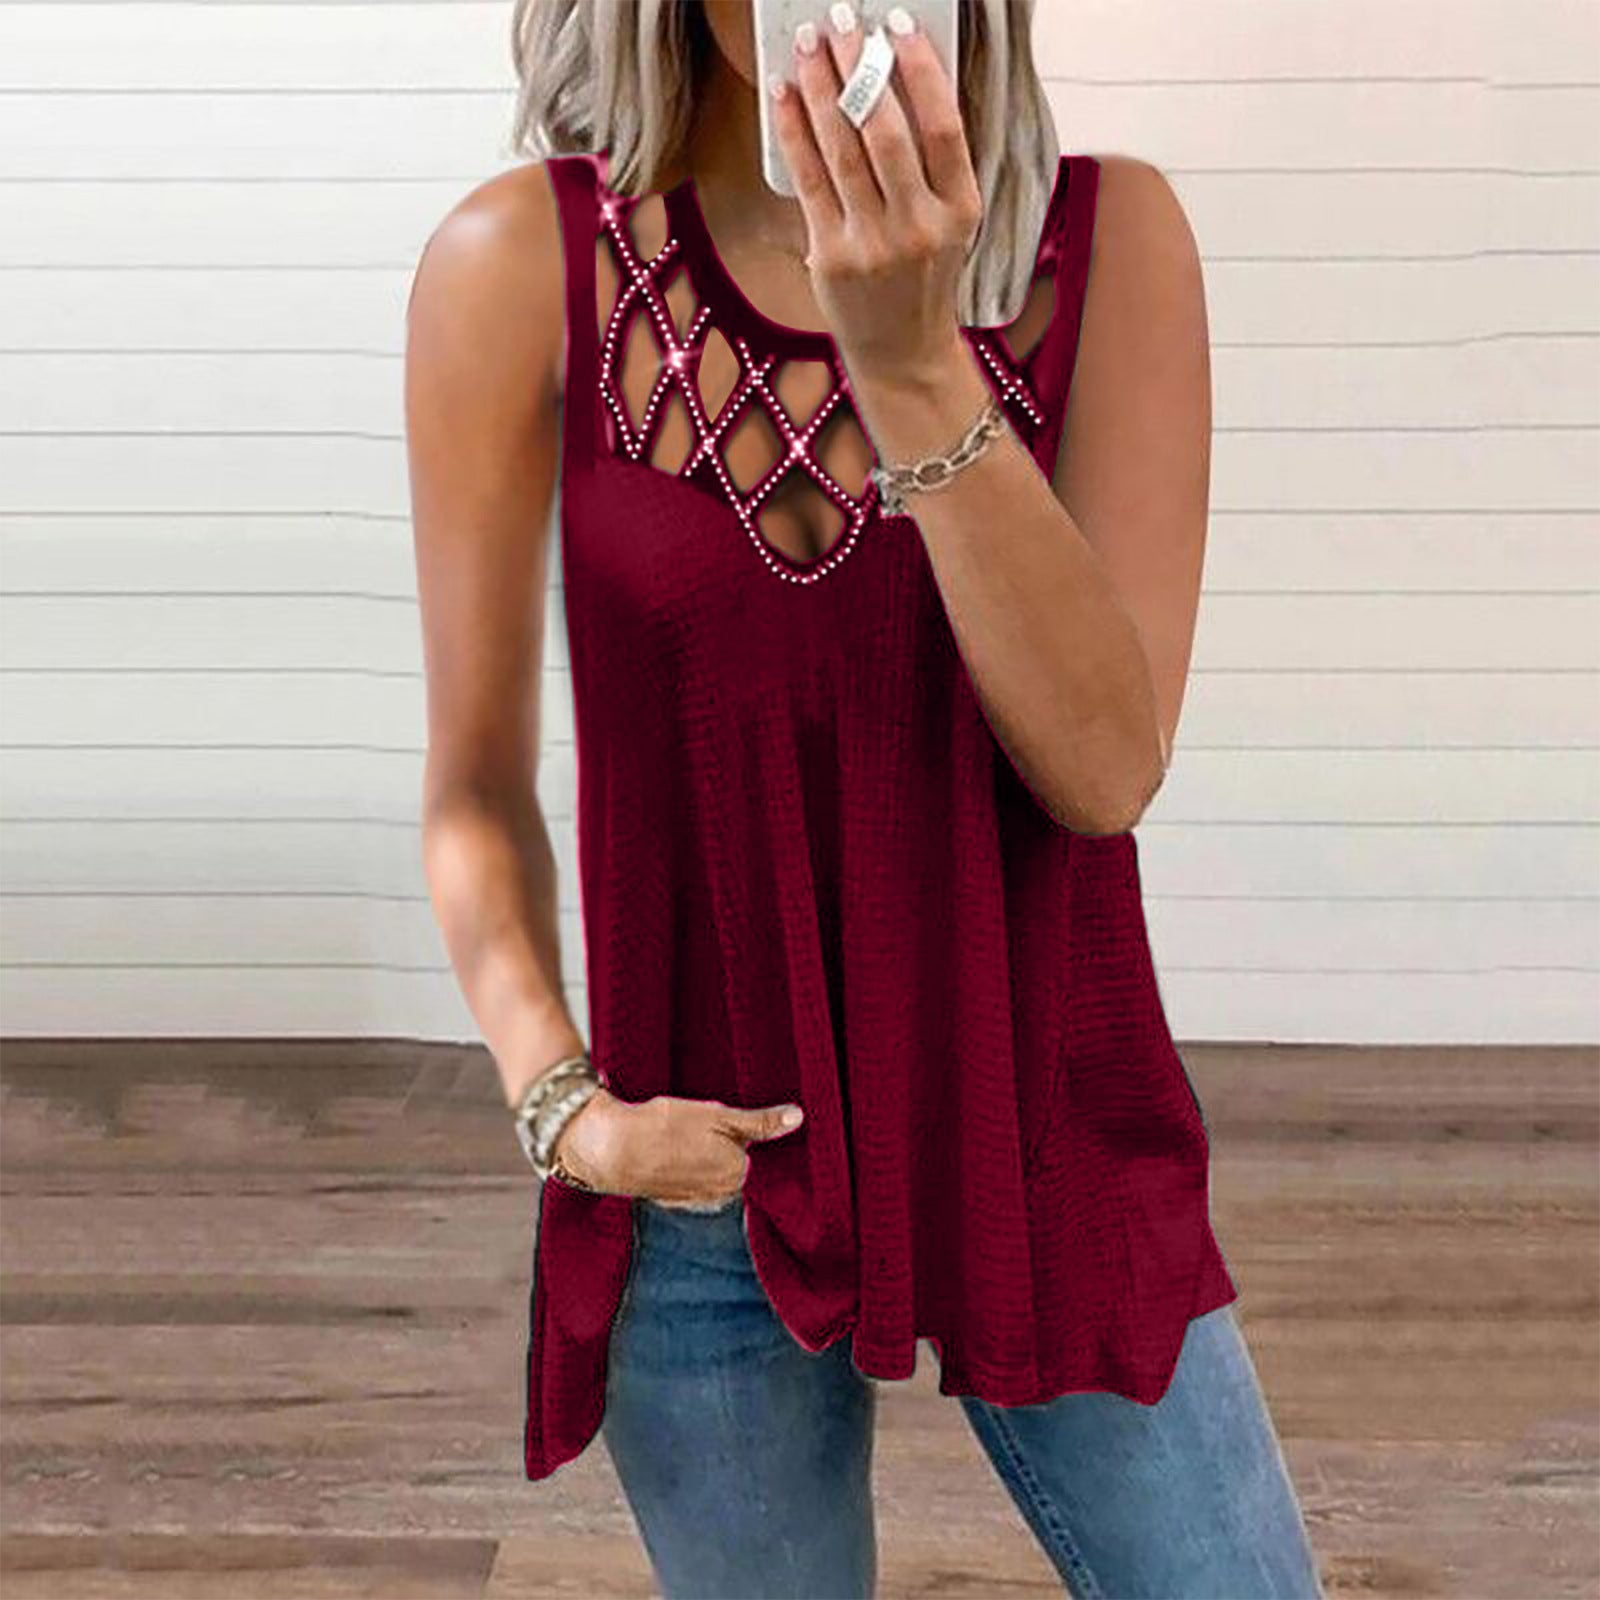 Women's Sexy Rhinestone Sleeveless Solid Color T-shirt Tops